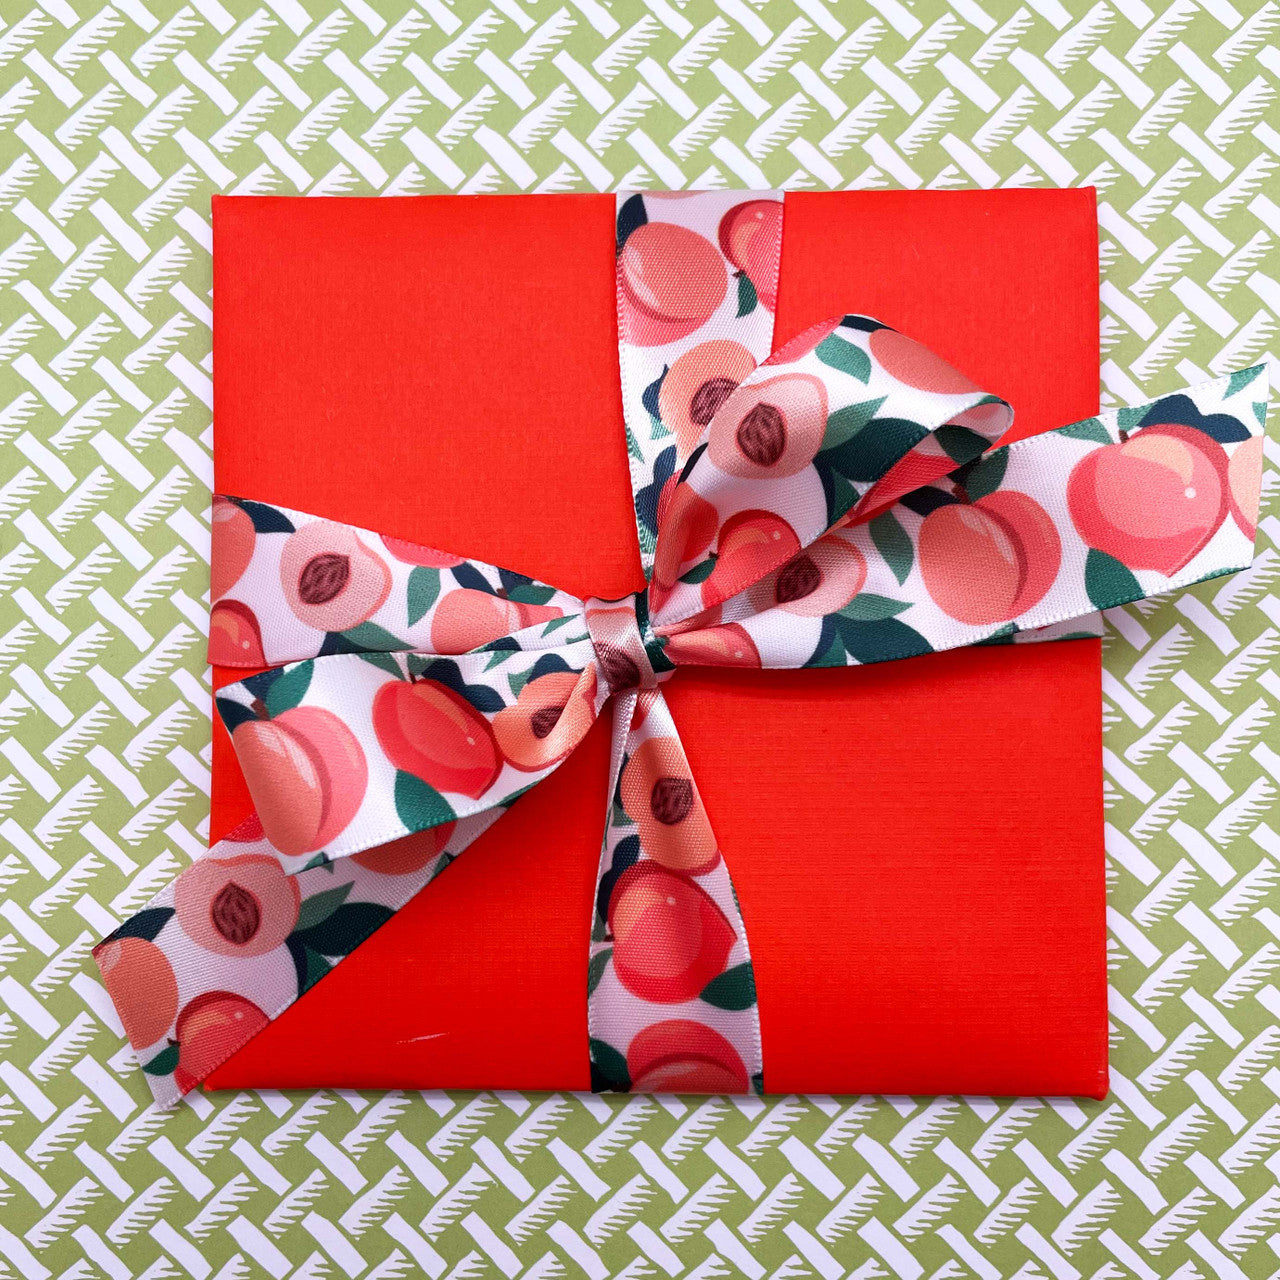 Tie a sweet bow on a little Summer gift for a peachy Summer gift!